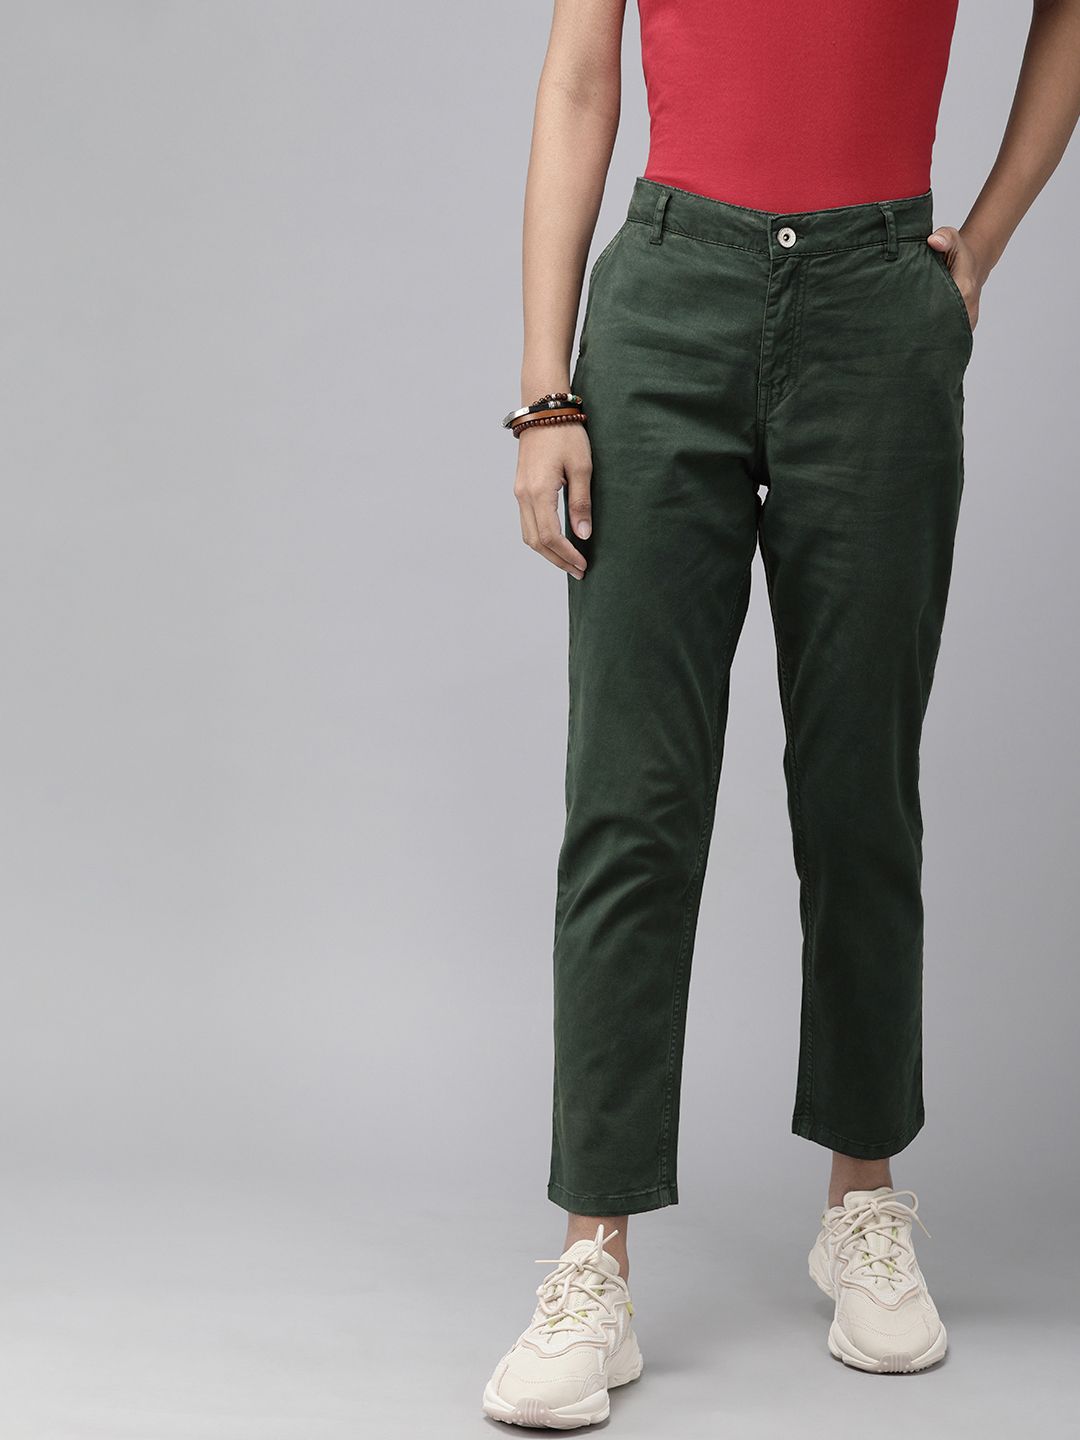 The Roadster Lifestyle Co Women Green Tapered Fit Chinos Trousers Price in India